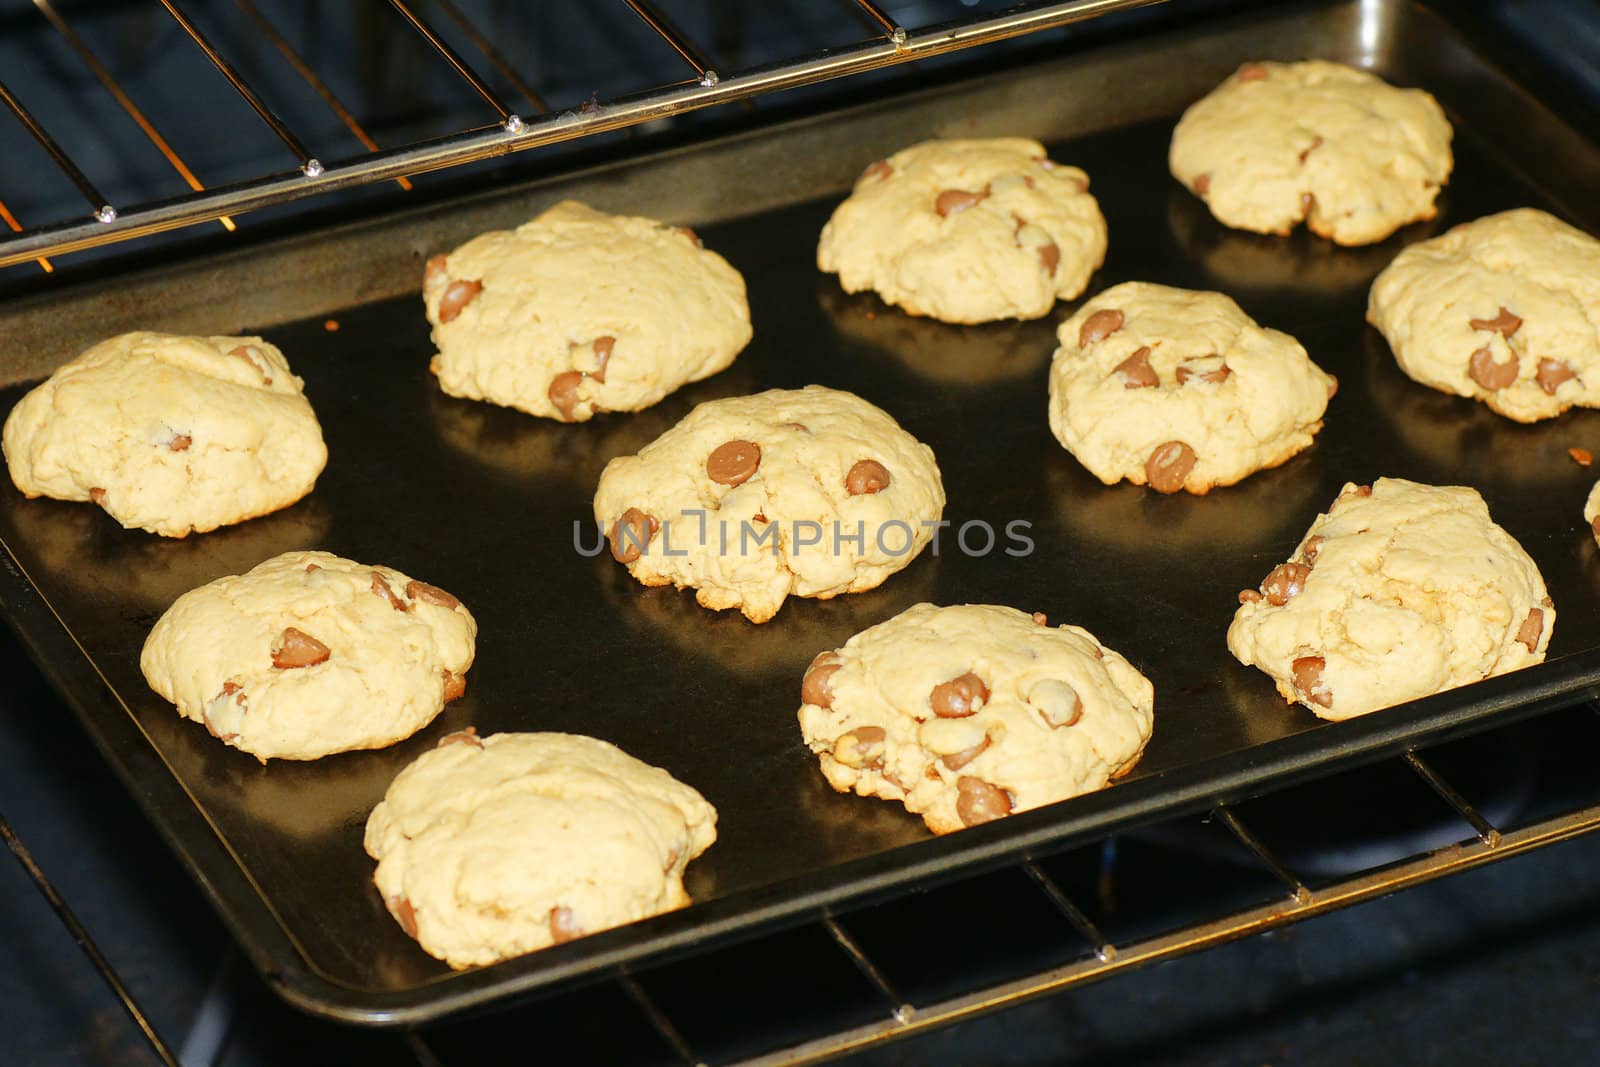 Baking delicious homemade chocolate chip cookies in a non stick pan and oven.